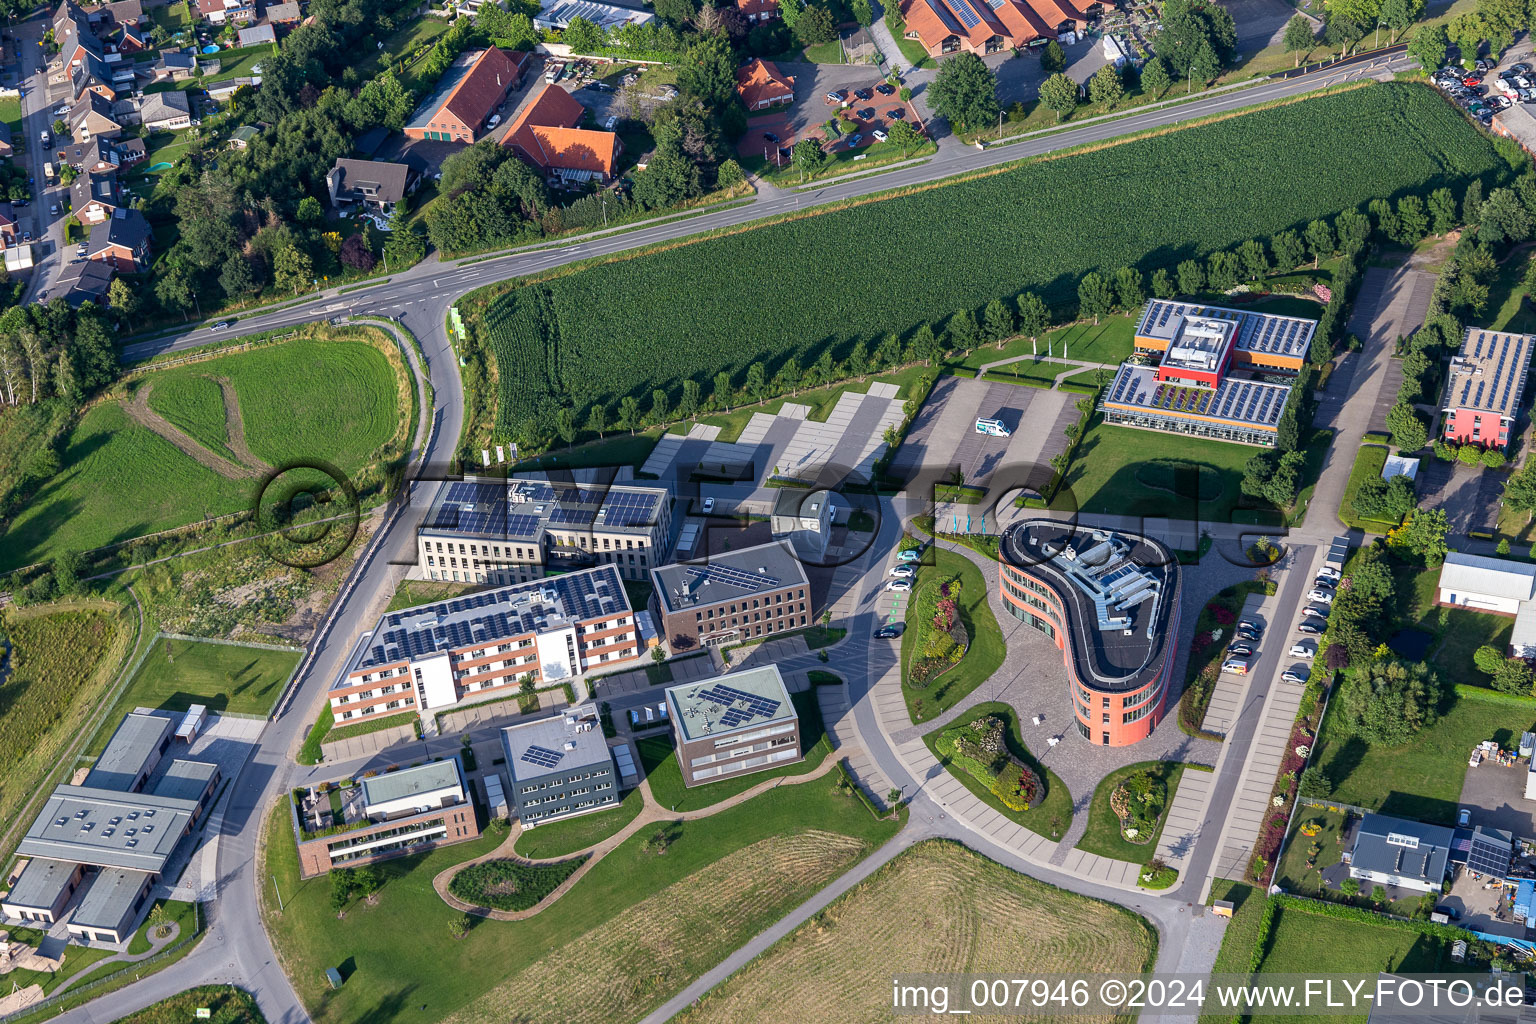 Aerial view of Industrial estate and company settlement with SHOPMACHER eCommerce GmbH & Co. KG, Windhoff Group and d.velop in Gescher in the state North Rhine-Westphalia, Germany